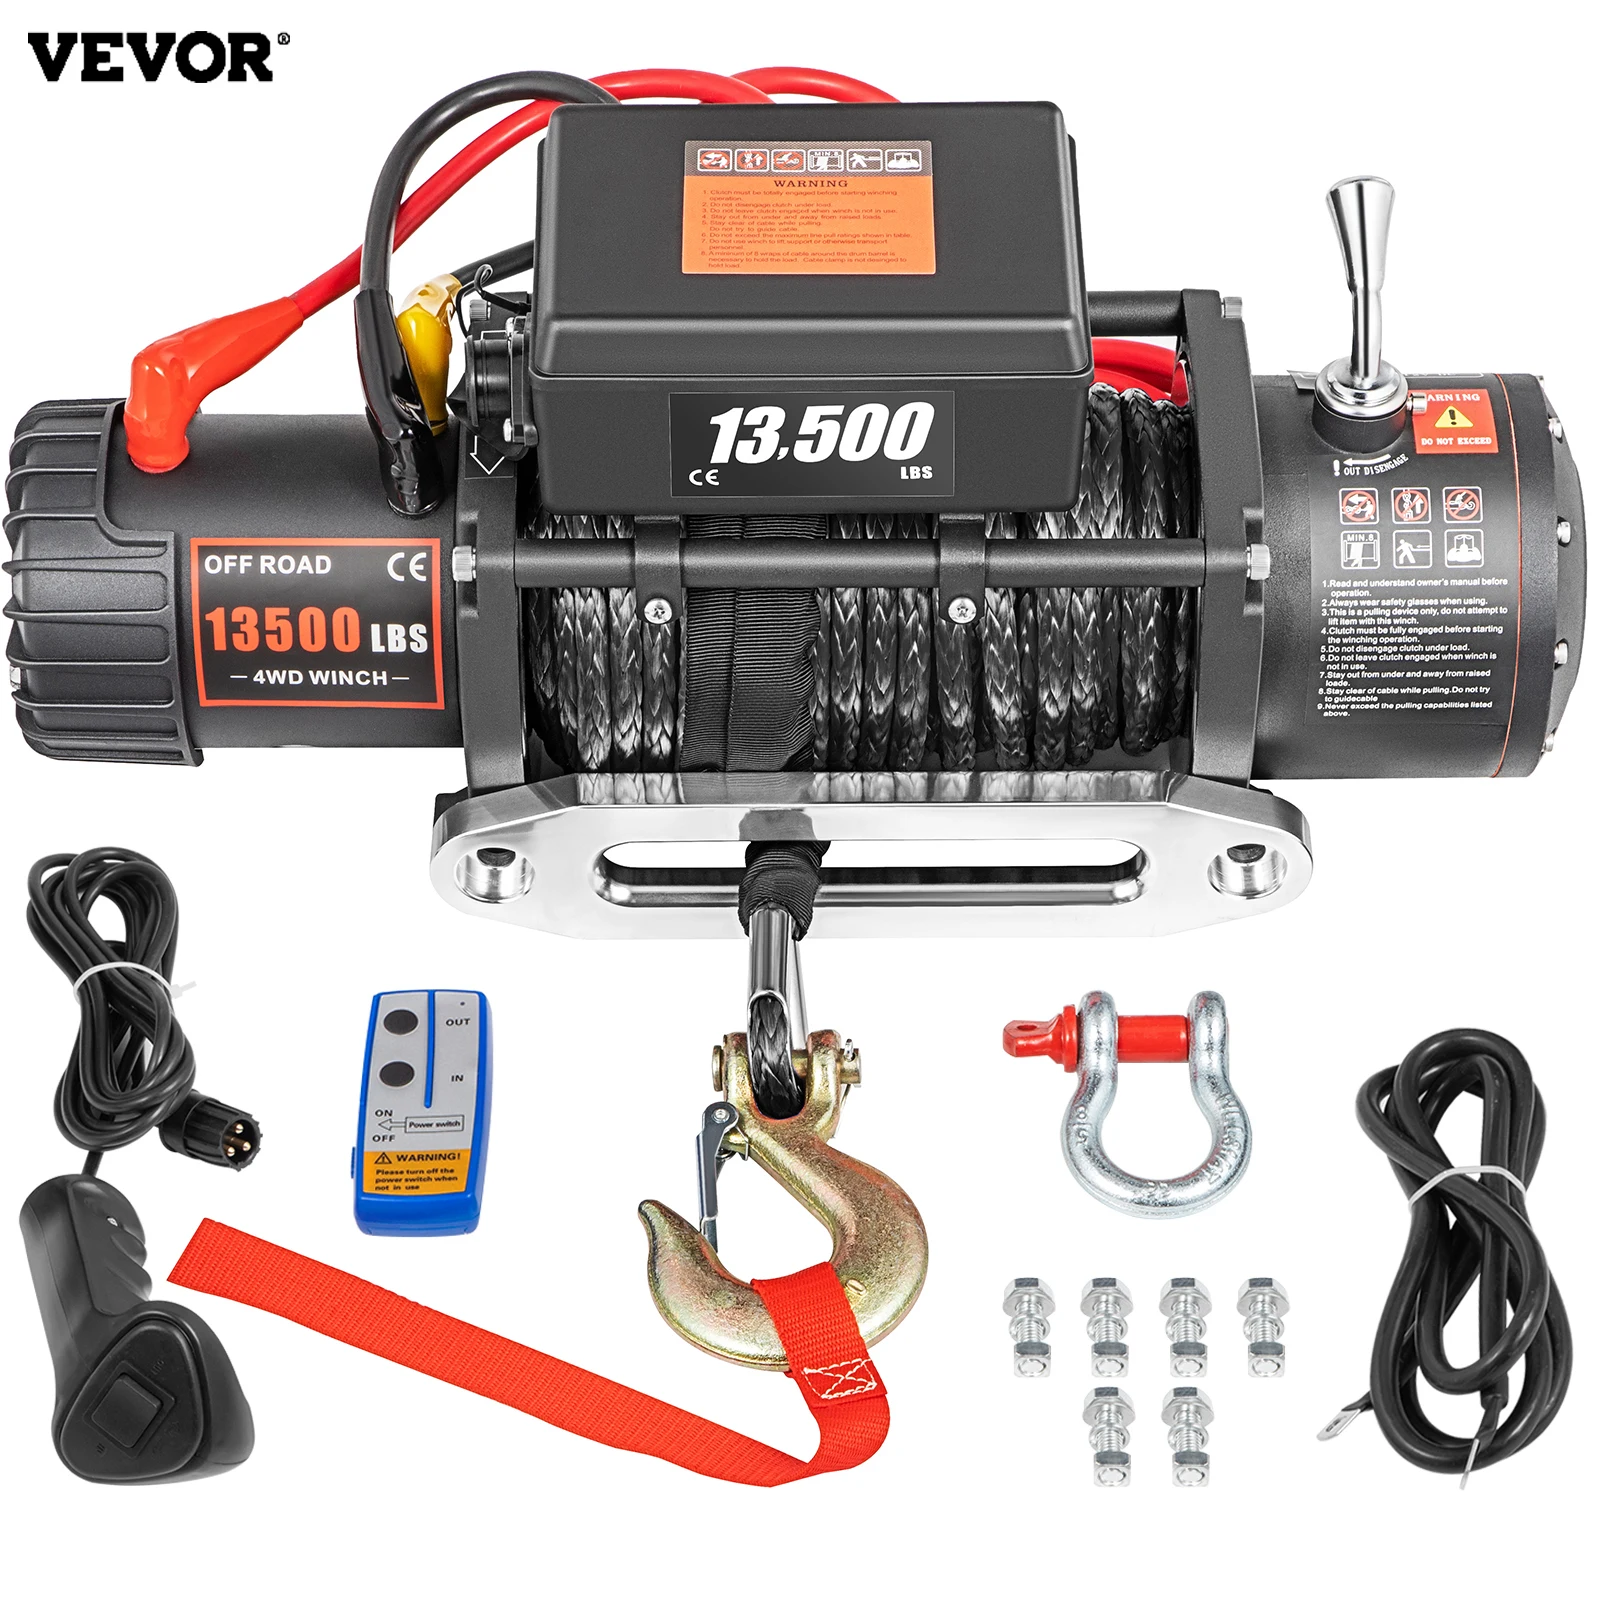 

VEVOR Electric Winch 13500Lb/6125Kg Electric Winch Recovery 12v Electric Truck Winch Synthetic Dyneema Rope Wireless Remote